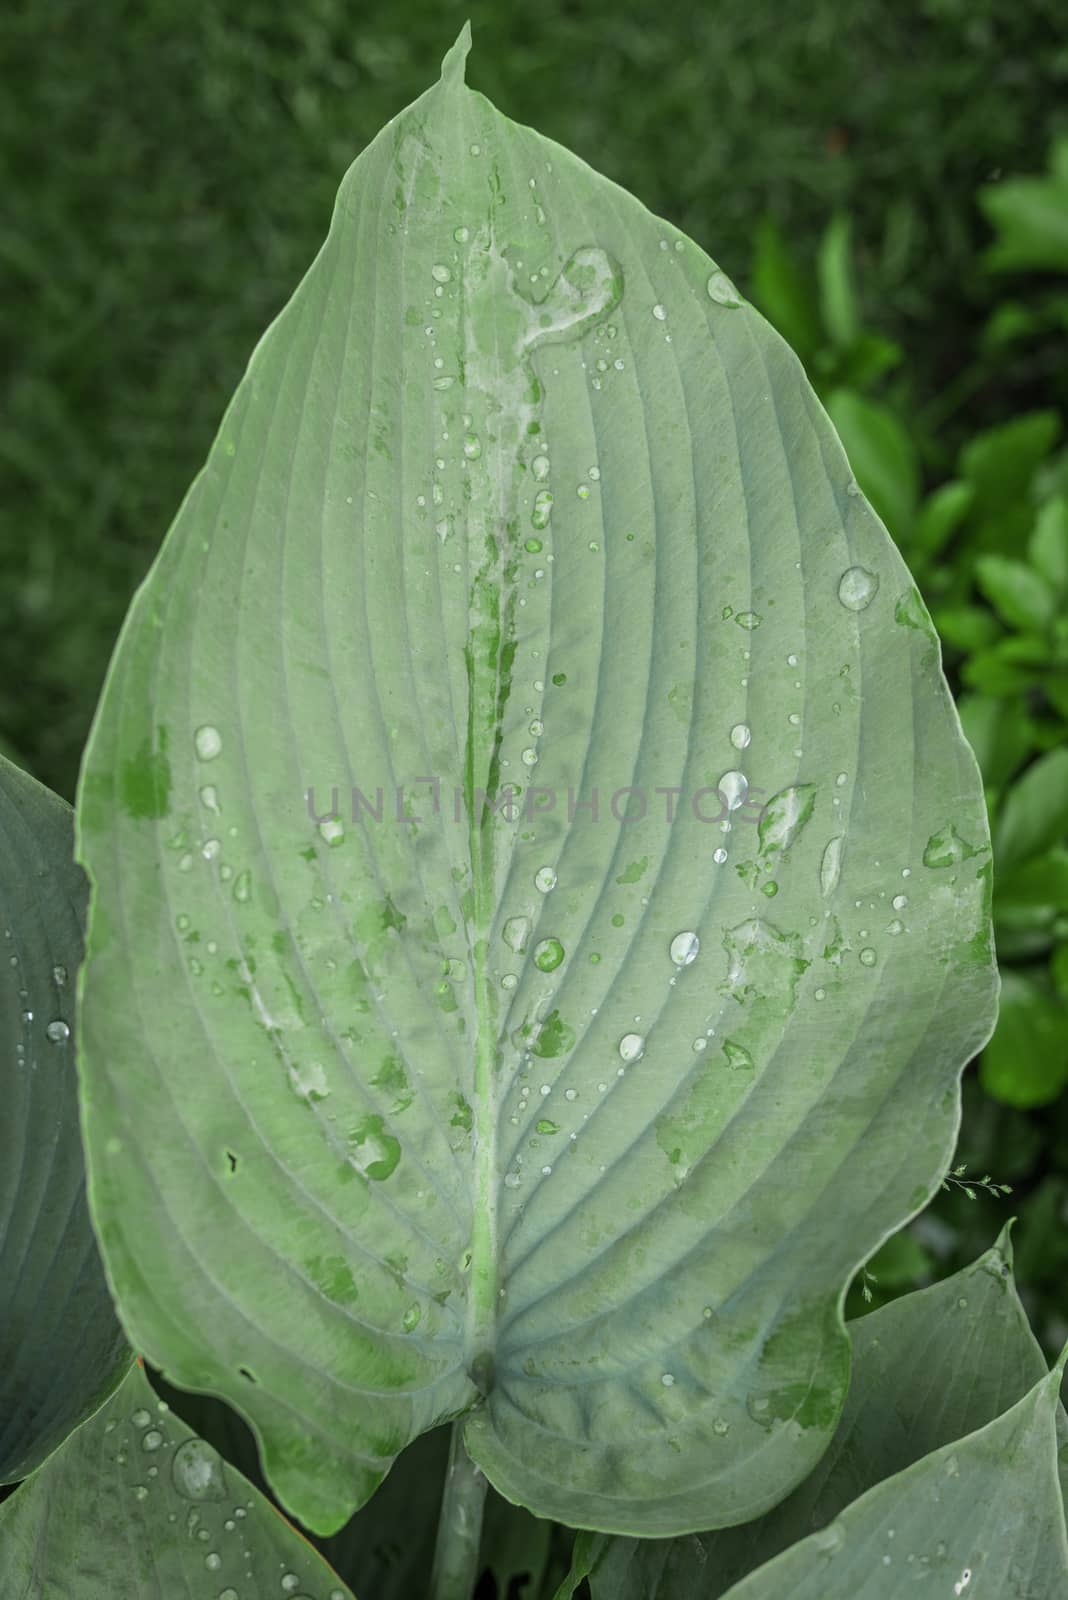 Big green leaf with raindrops in a garden in the morning